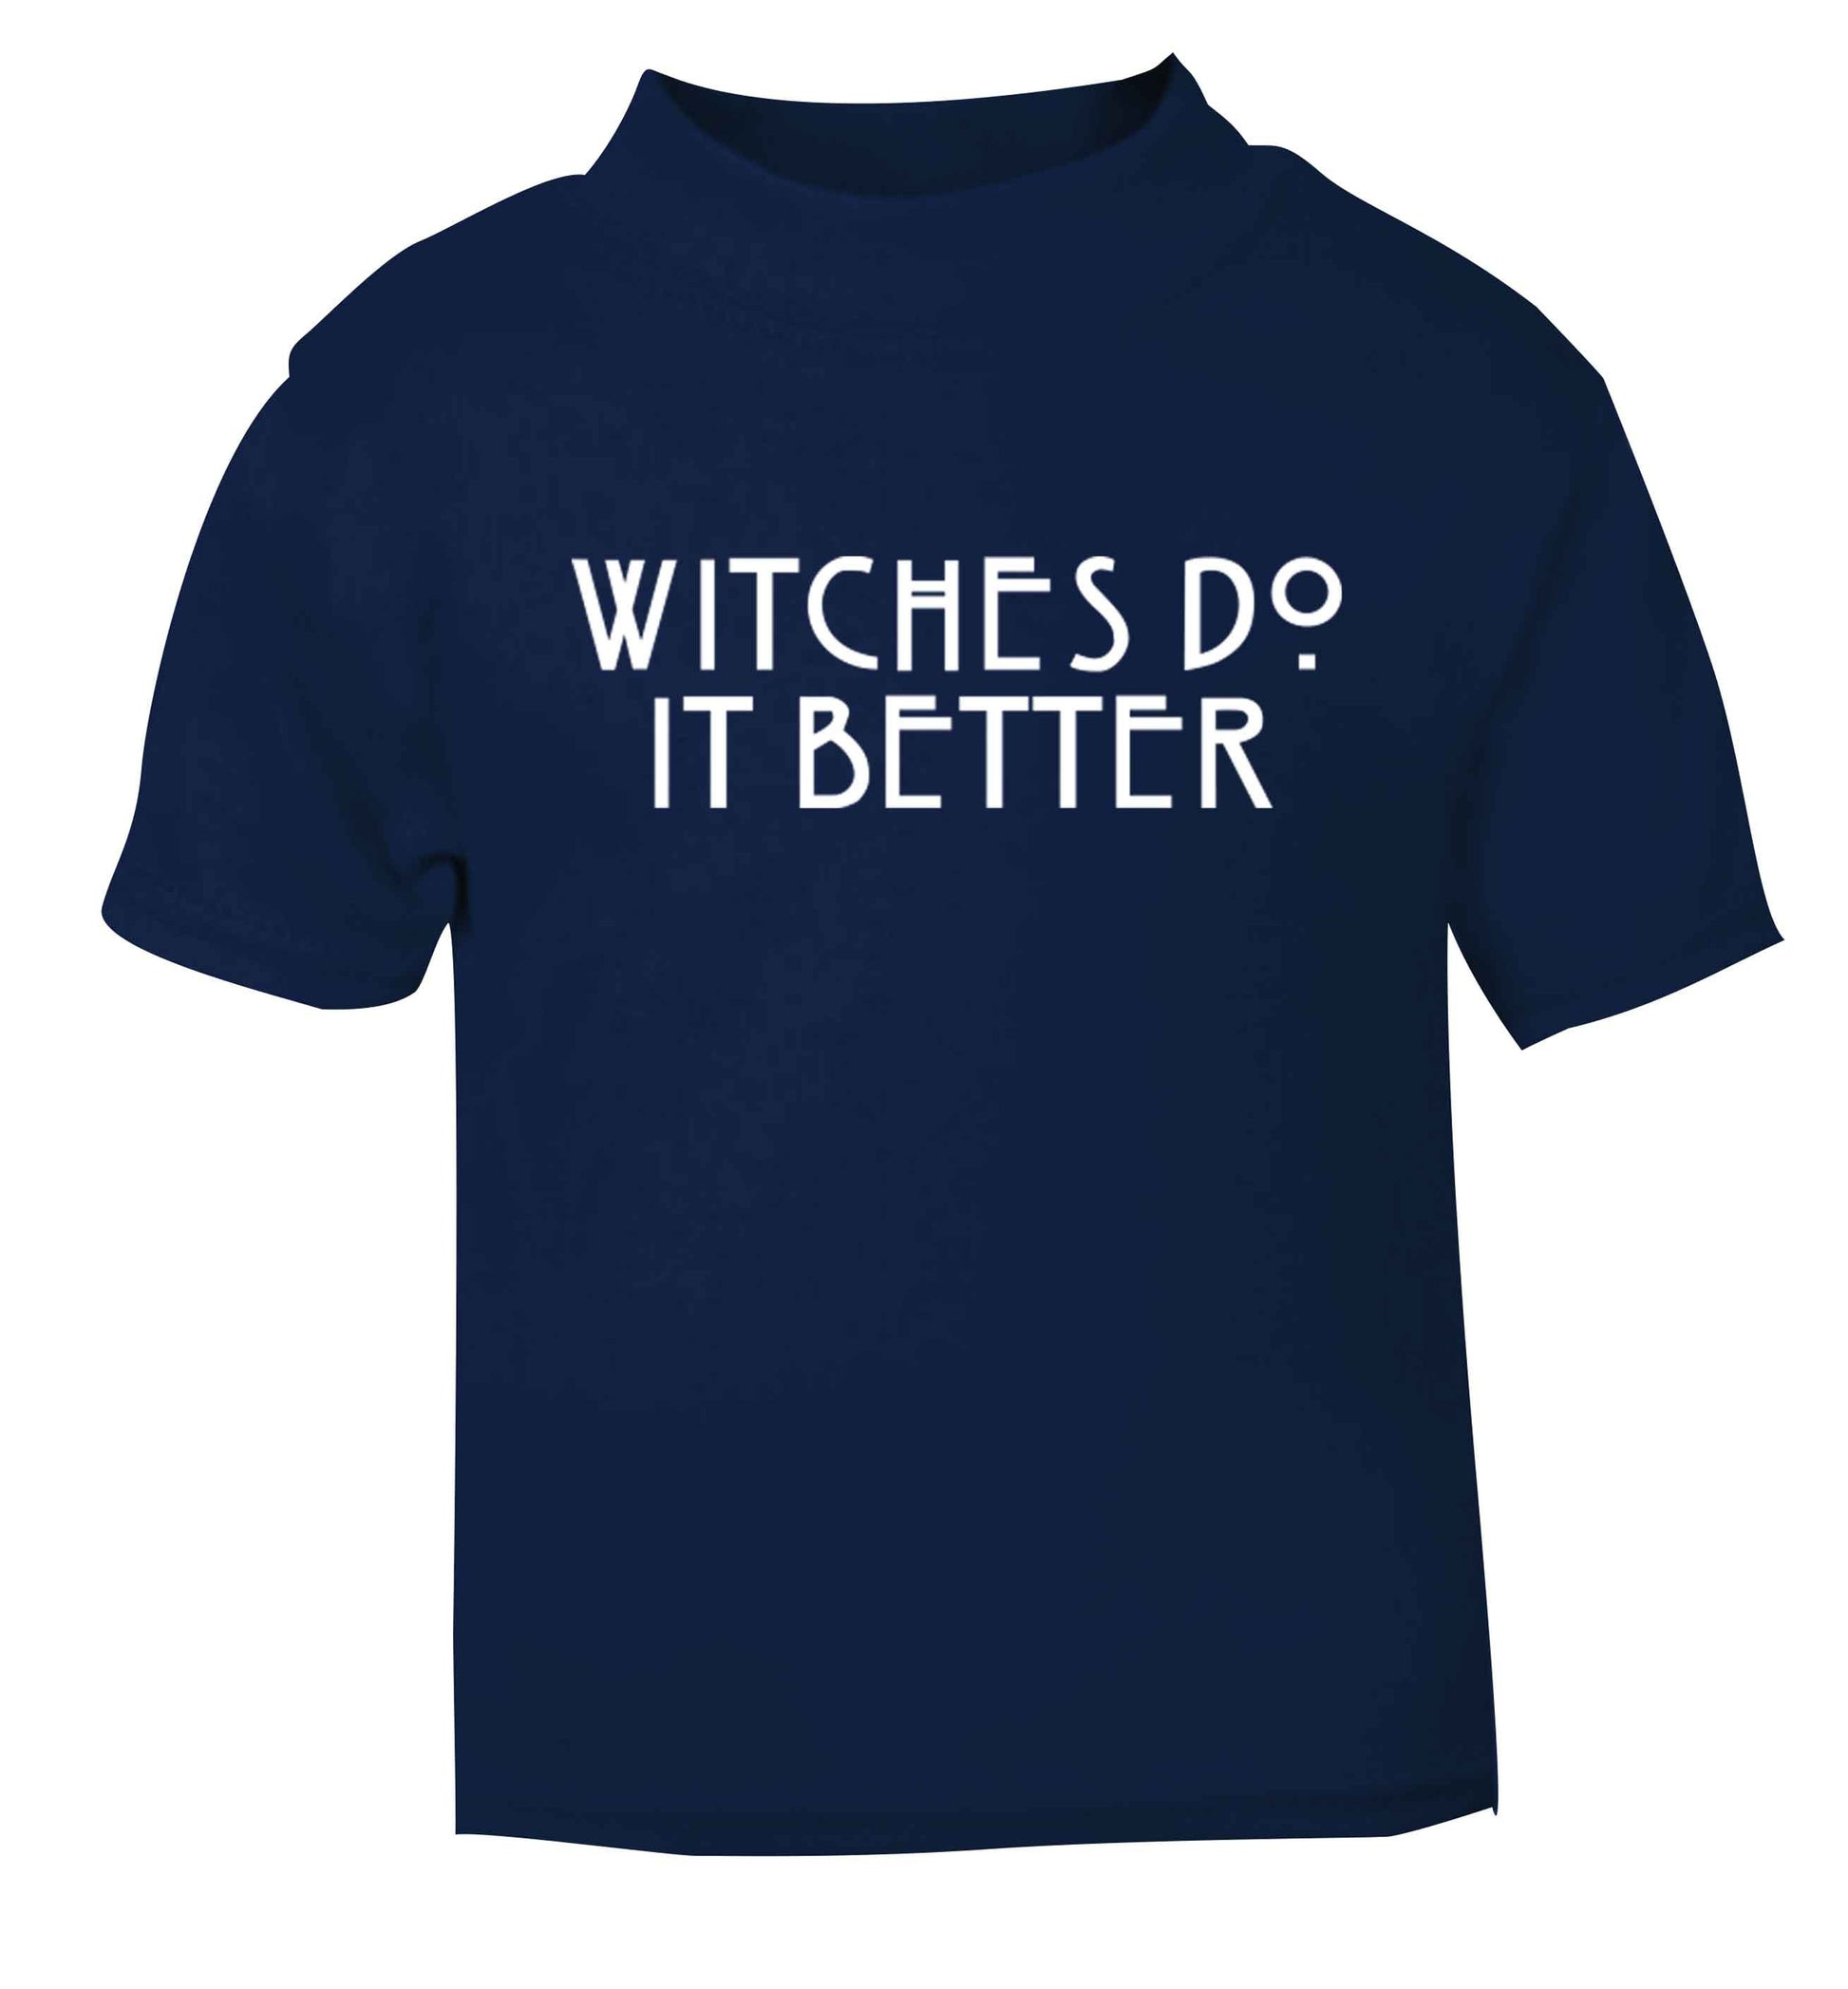 Witches do it better navy baby toddler Tshirt 2 Years